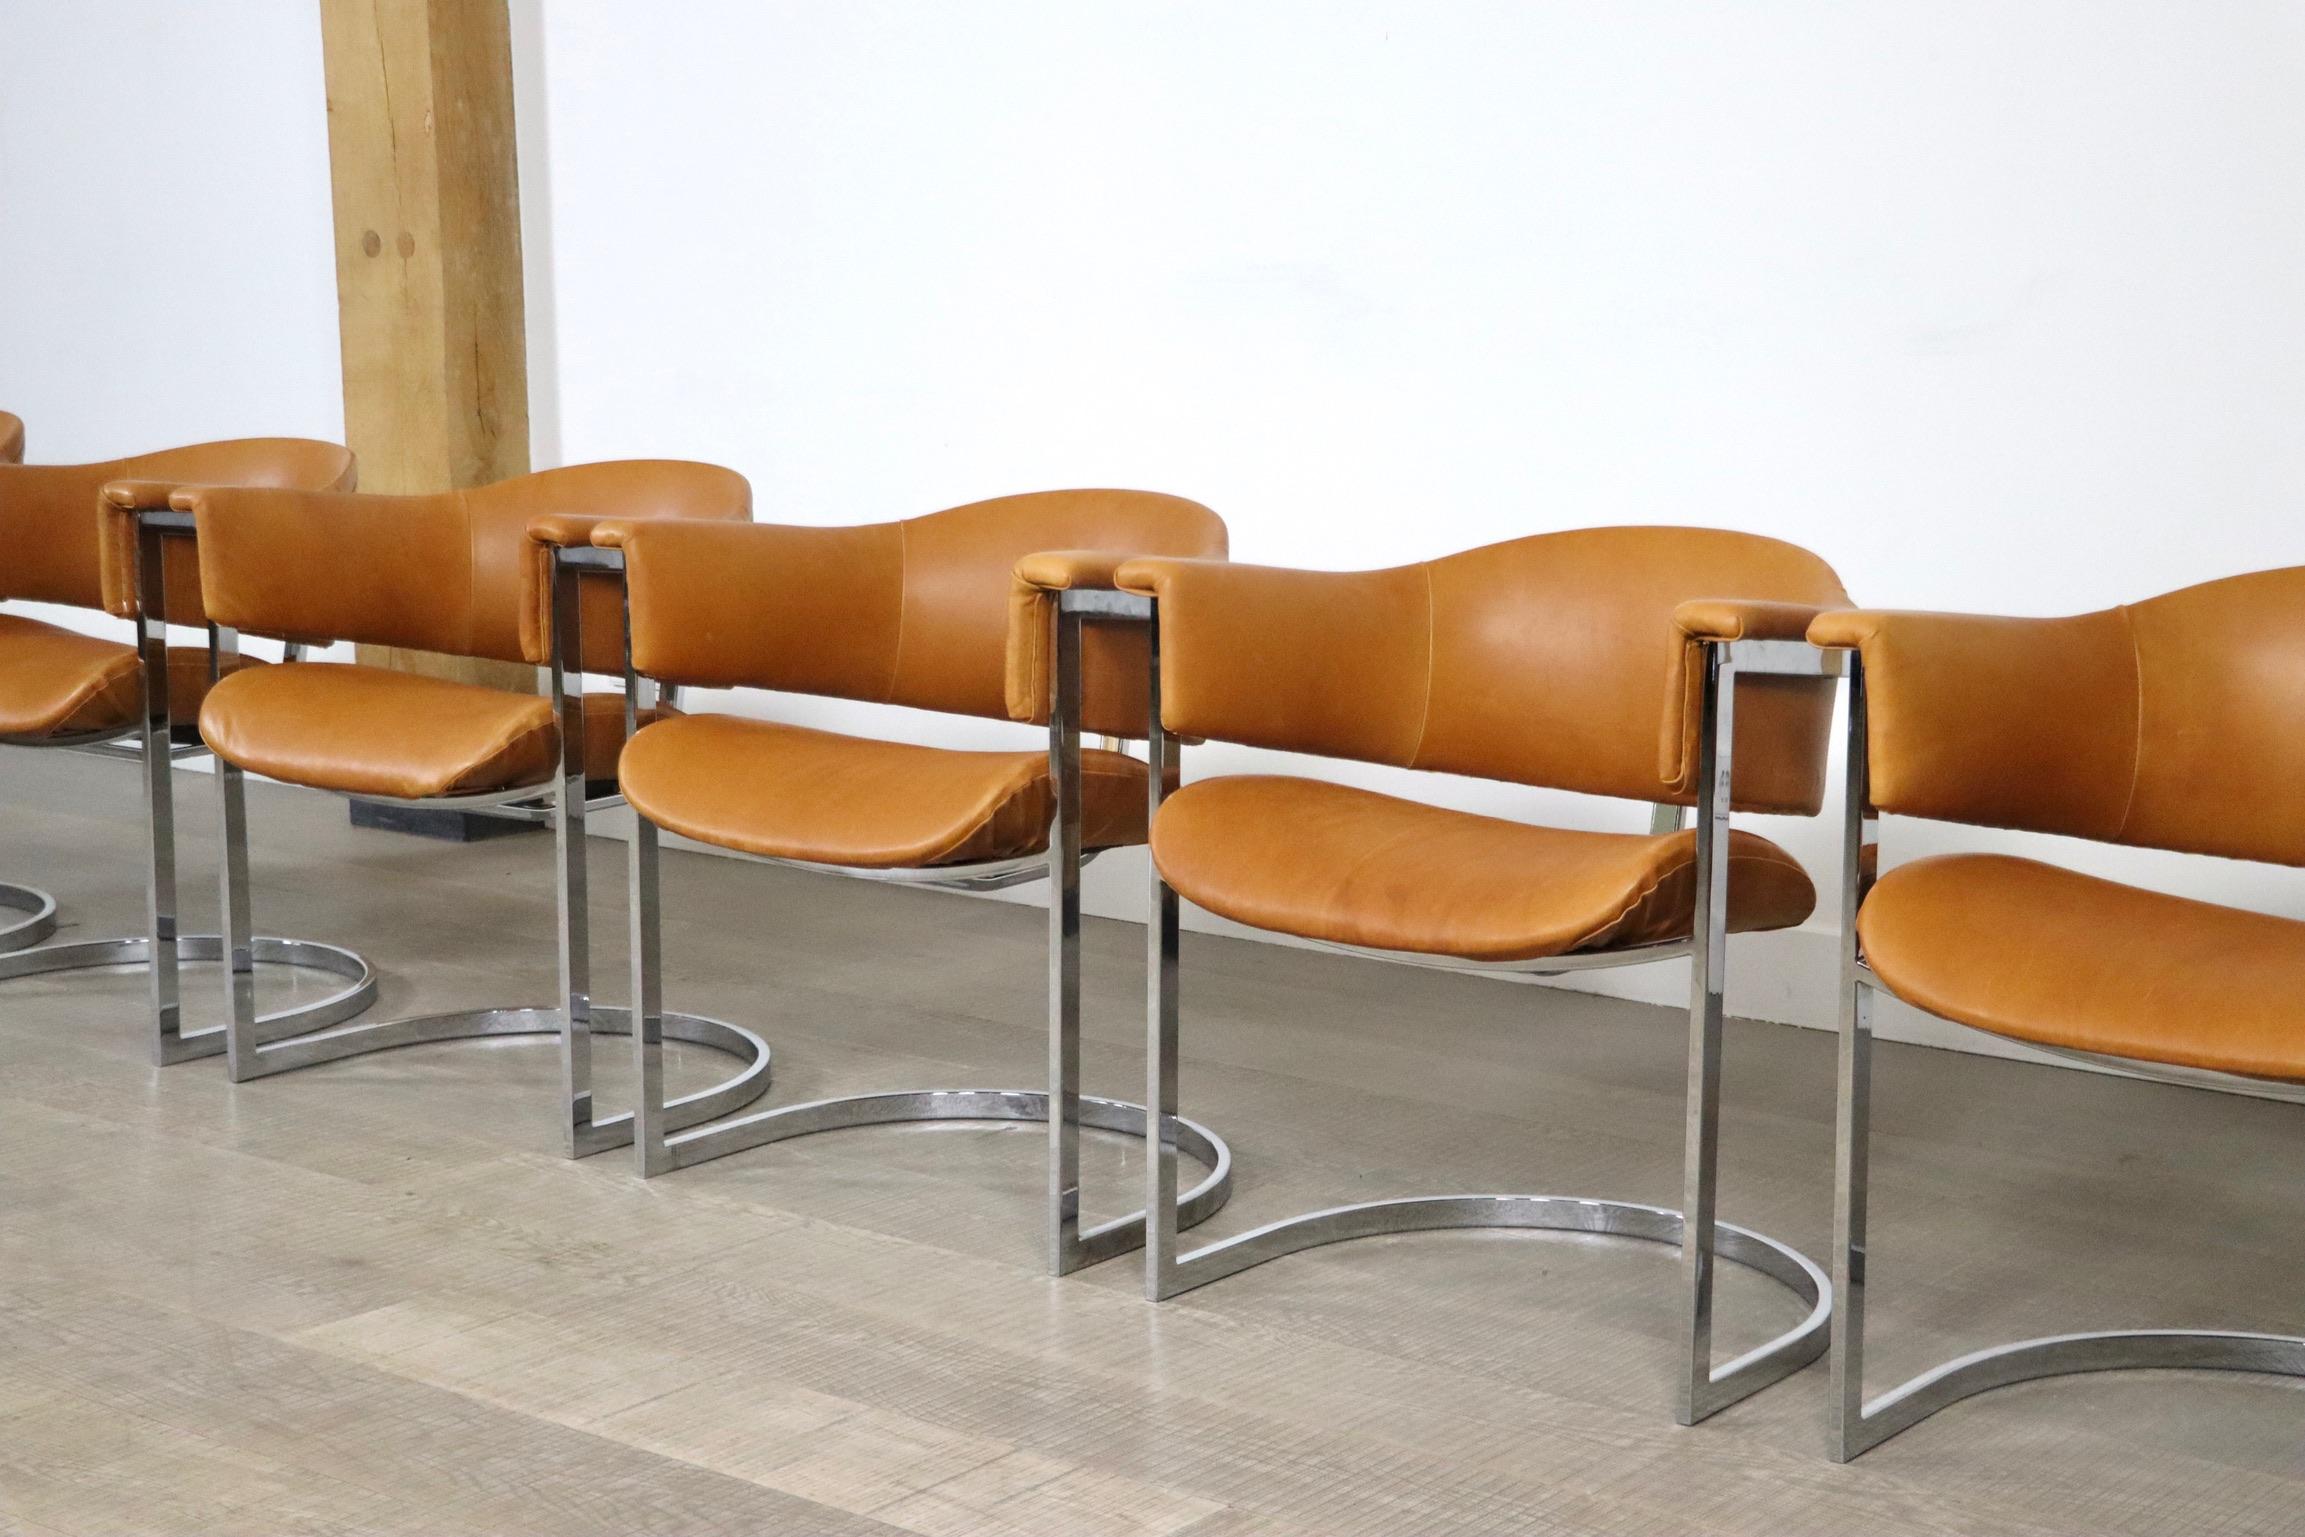 Amazing set of 6 cantilevered dining chairs in chromed steel and cognac leather by Vittorio Introini for Mario Sabot, Italy, 1970s. 
This incredible set is aside its outstanding design very comfortable. The cognac leather seating and backrests